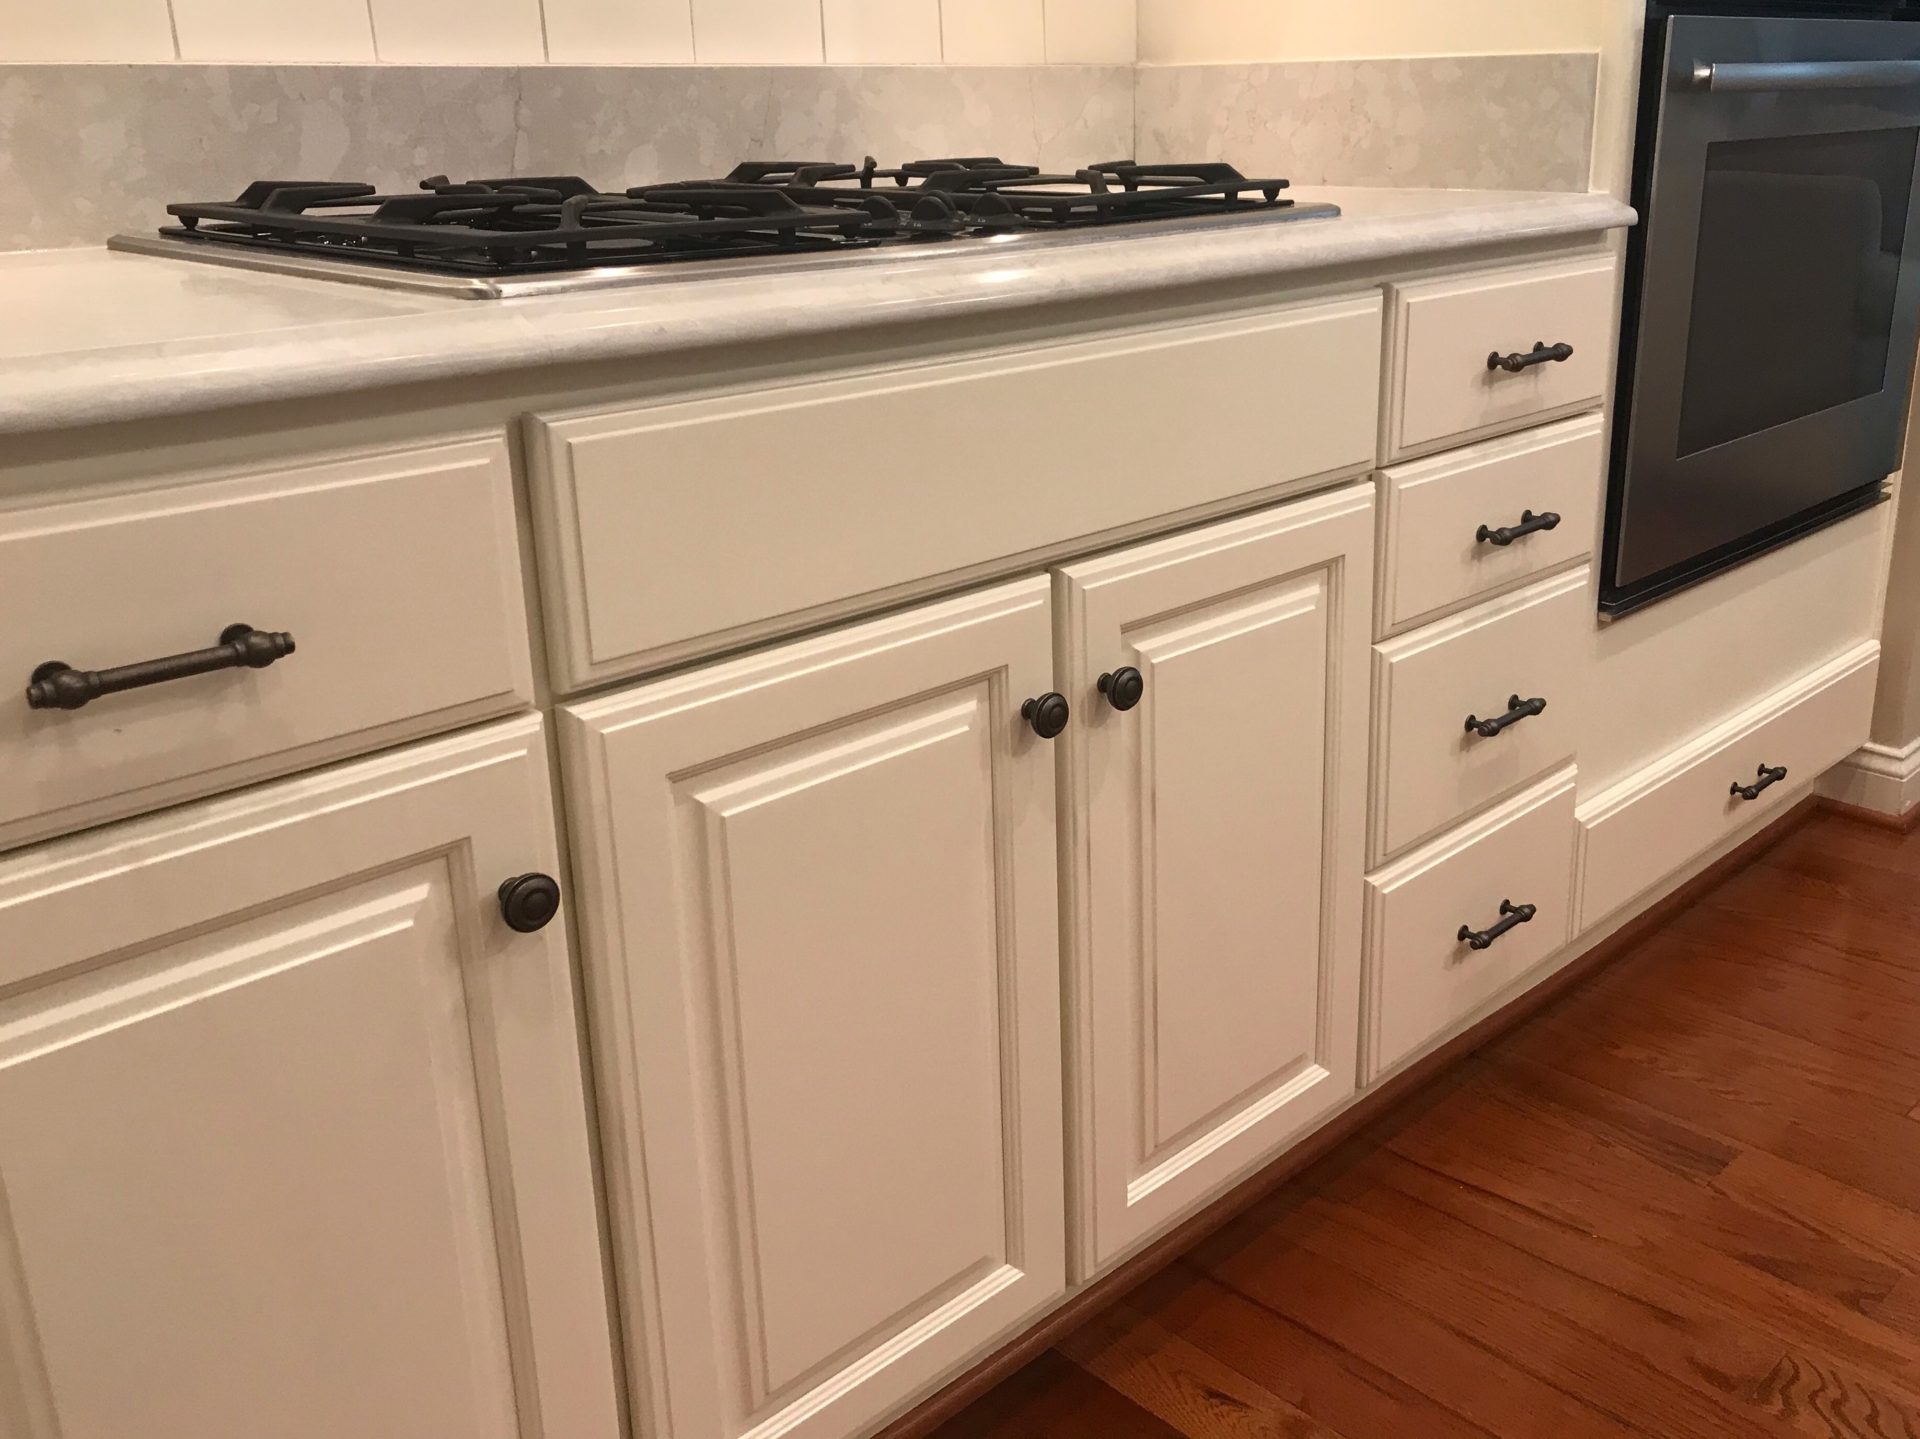 repainted kitchen cabinets